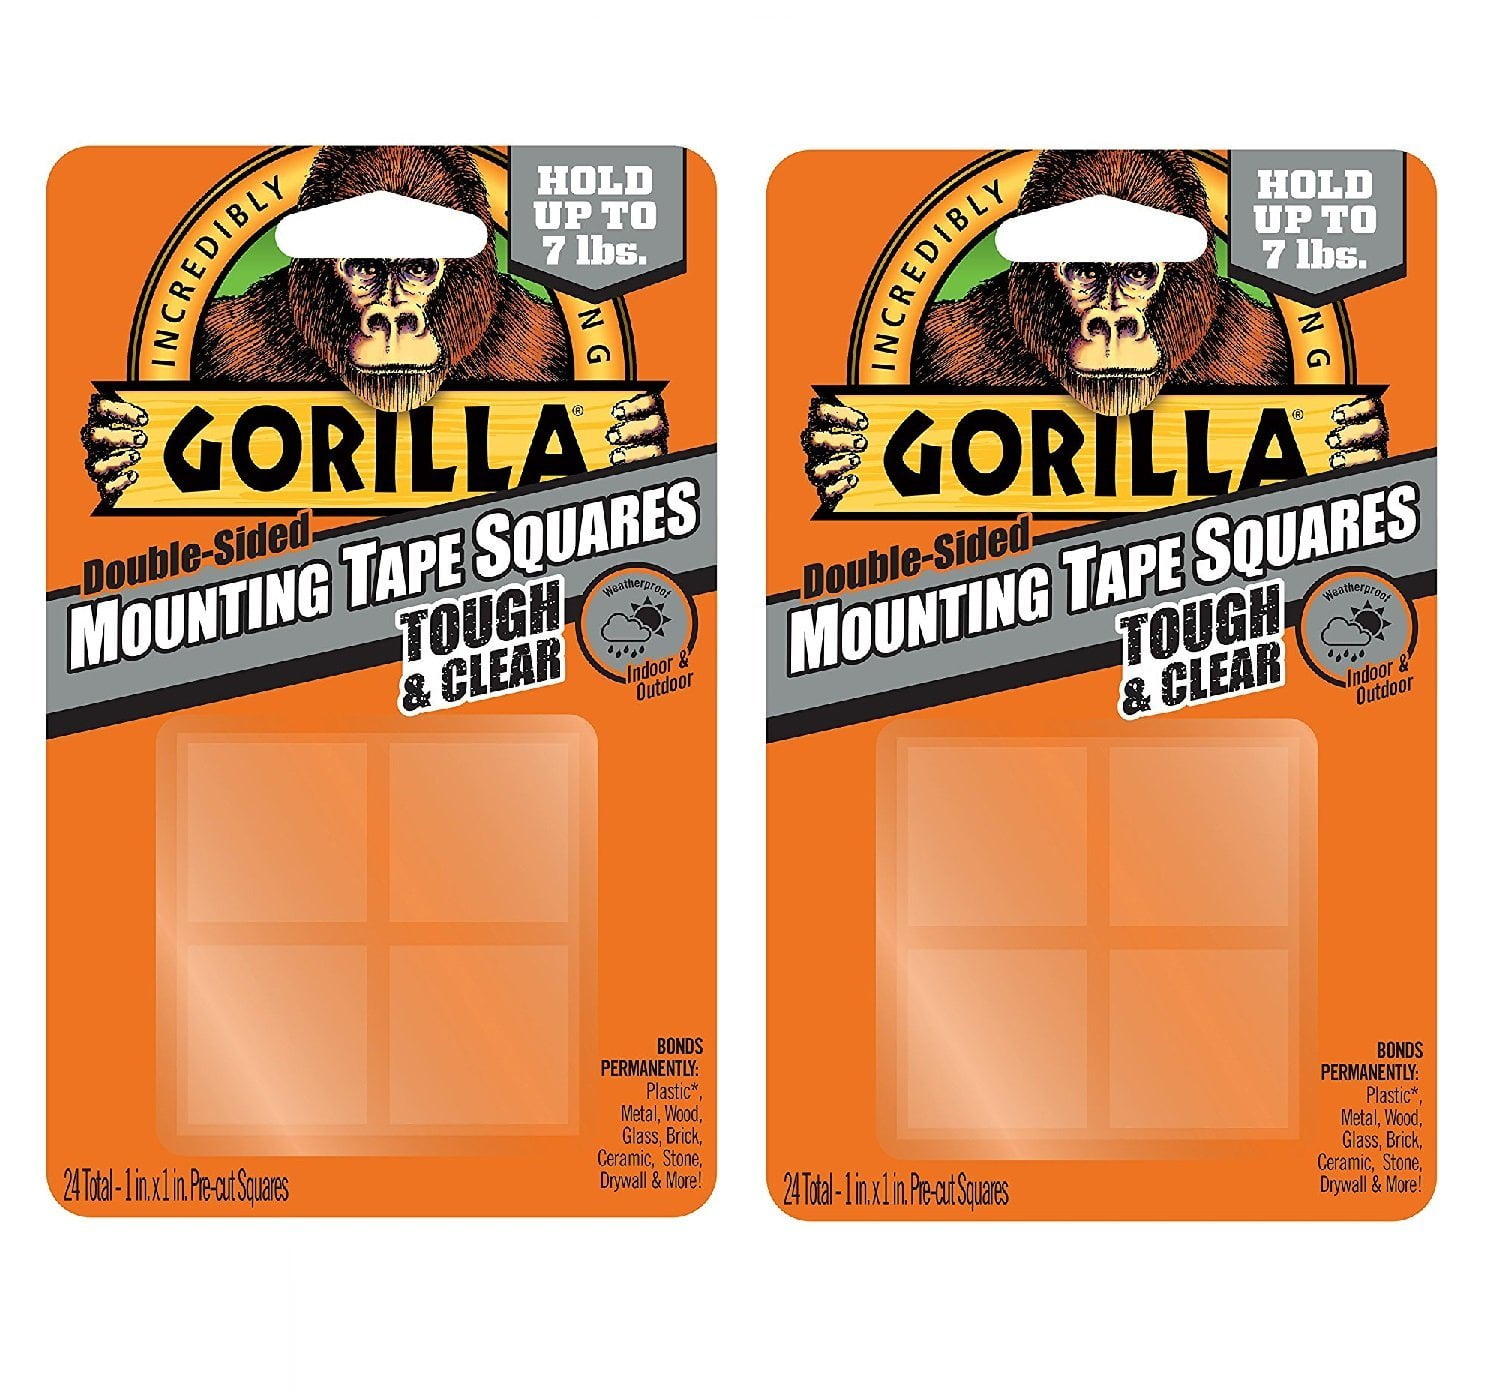 Gorilla 6067201 Mounting Tape Squares, Tough & Clear (2 Pack)